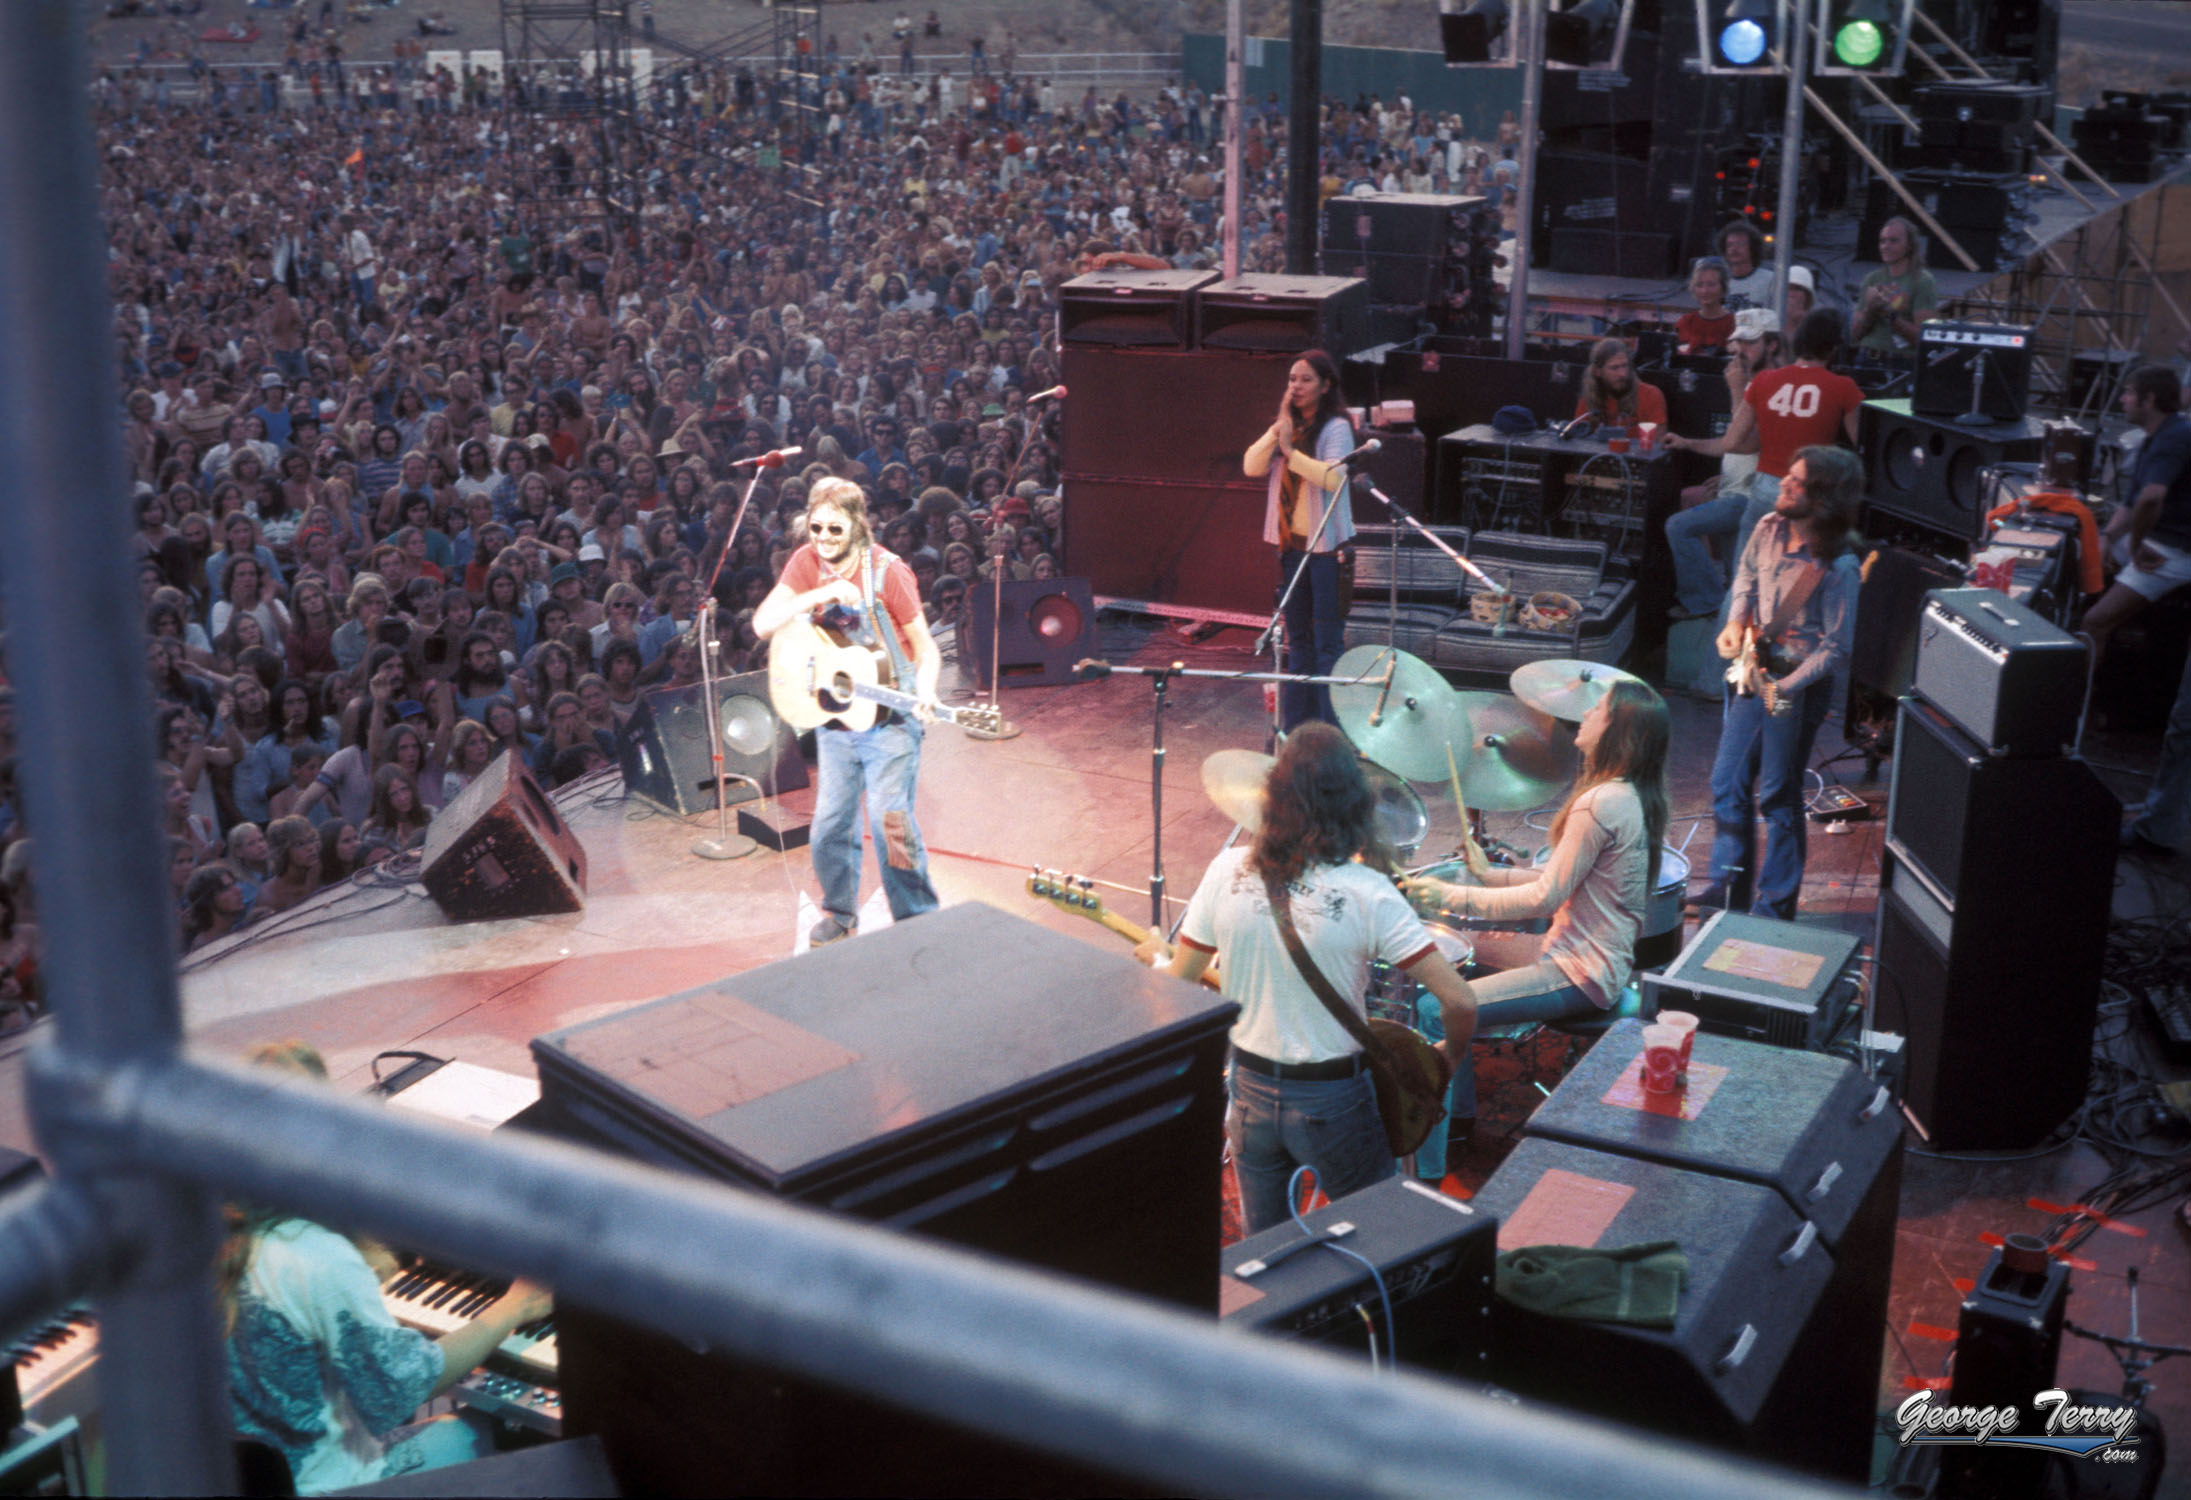 George Terry with Eric Clapton and Band